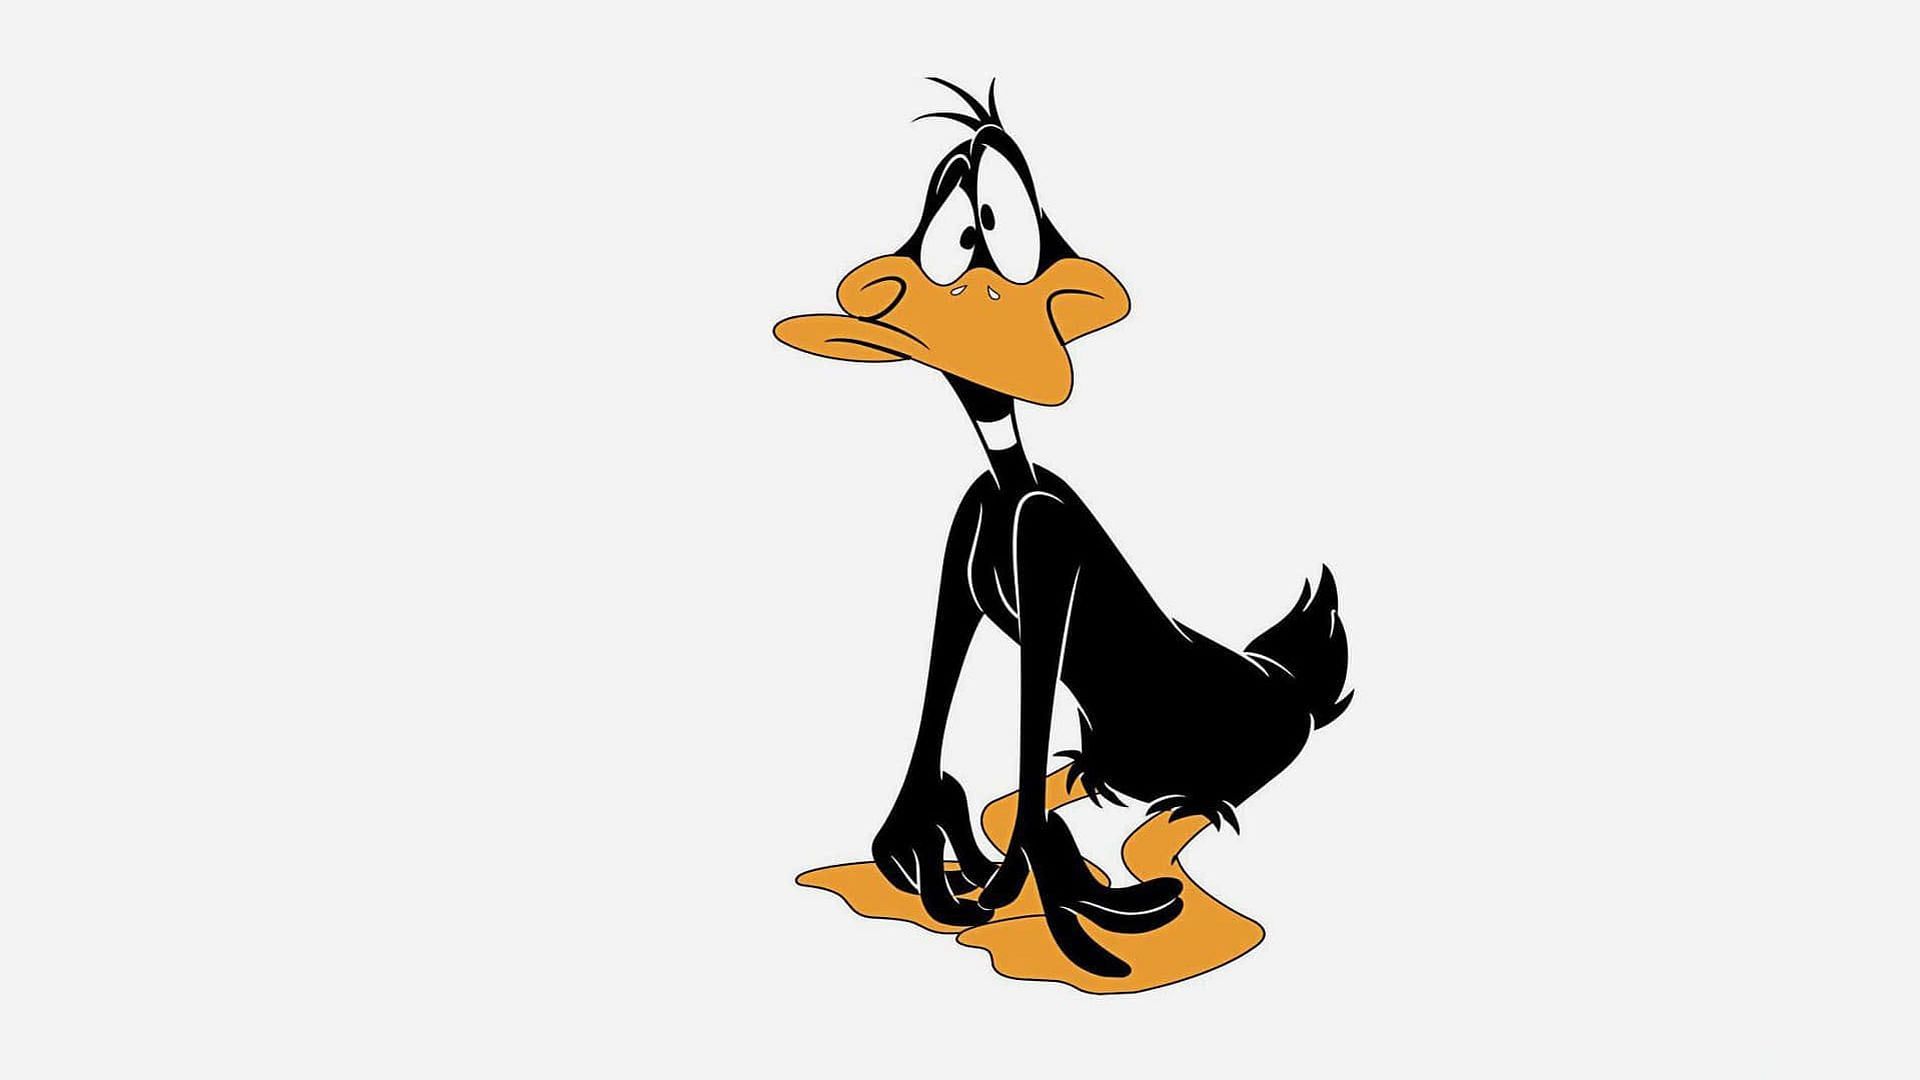 If Bugs Bunny can be in the game, then Daffy Duck should be too (Image via Warner Bros)